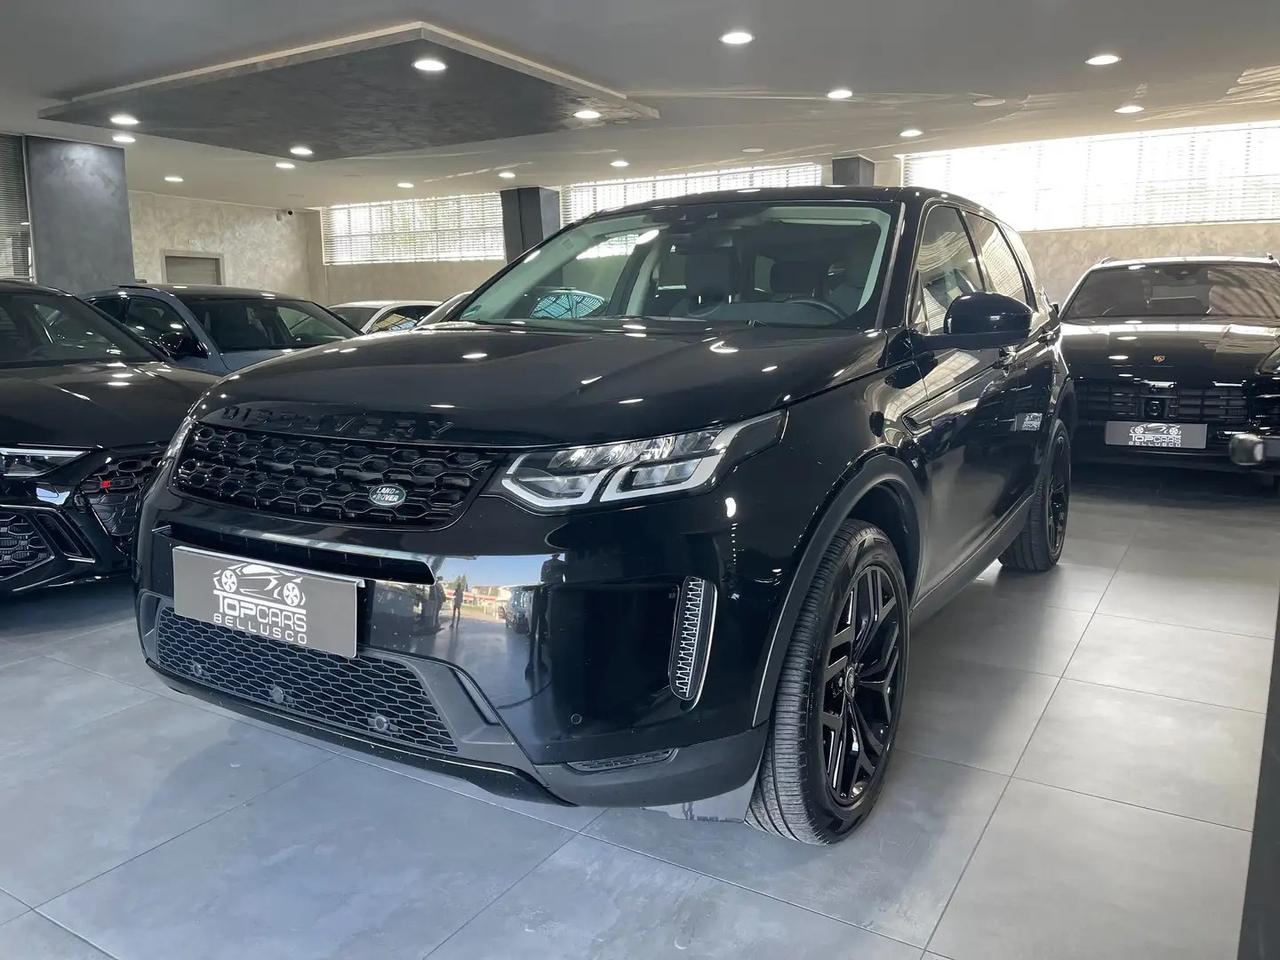 Land Rover Discovery Sport 2.0 TD4 180 CV AWD Auto HSE